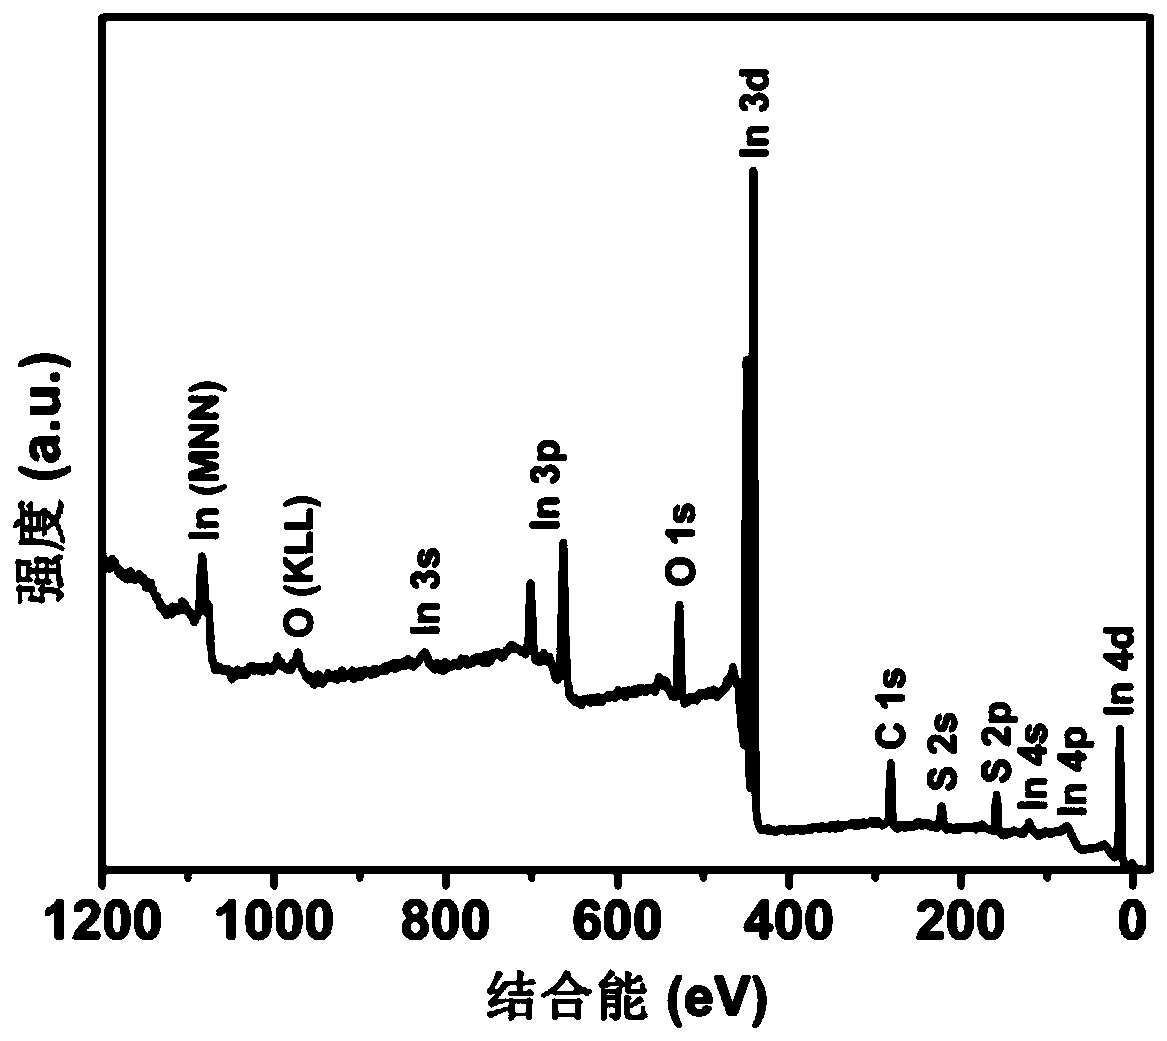 Preparation of indium oxide/indium sulfide heterojunction semiconductor material and use of photocatalyst and solar nitrogen fixation application